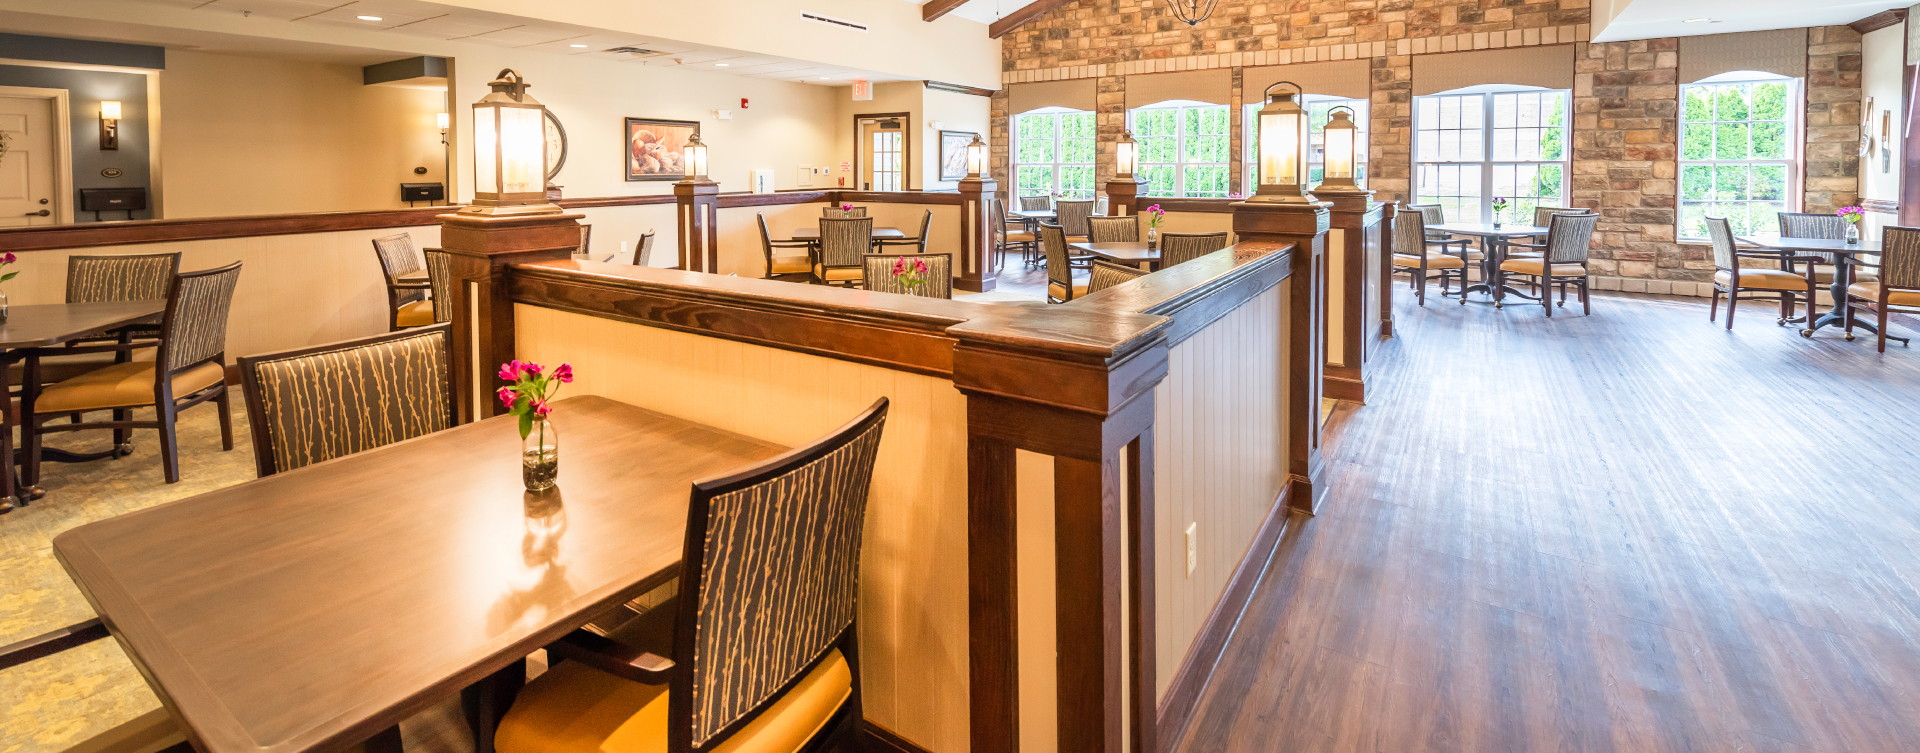 Enjoy restaurant -style meals served three times a day in our dining room at Bickford of Shelby Township